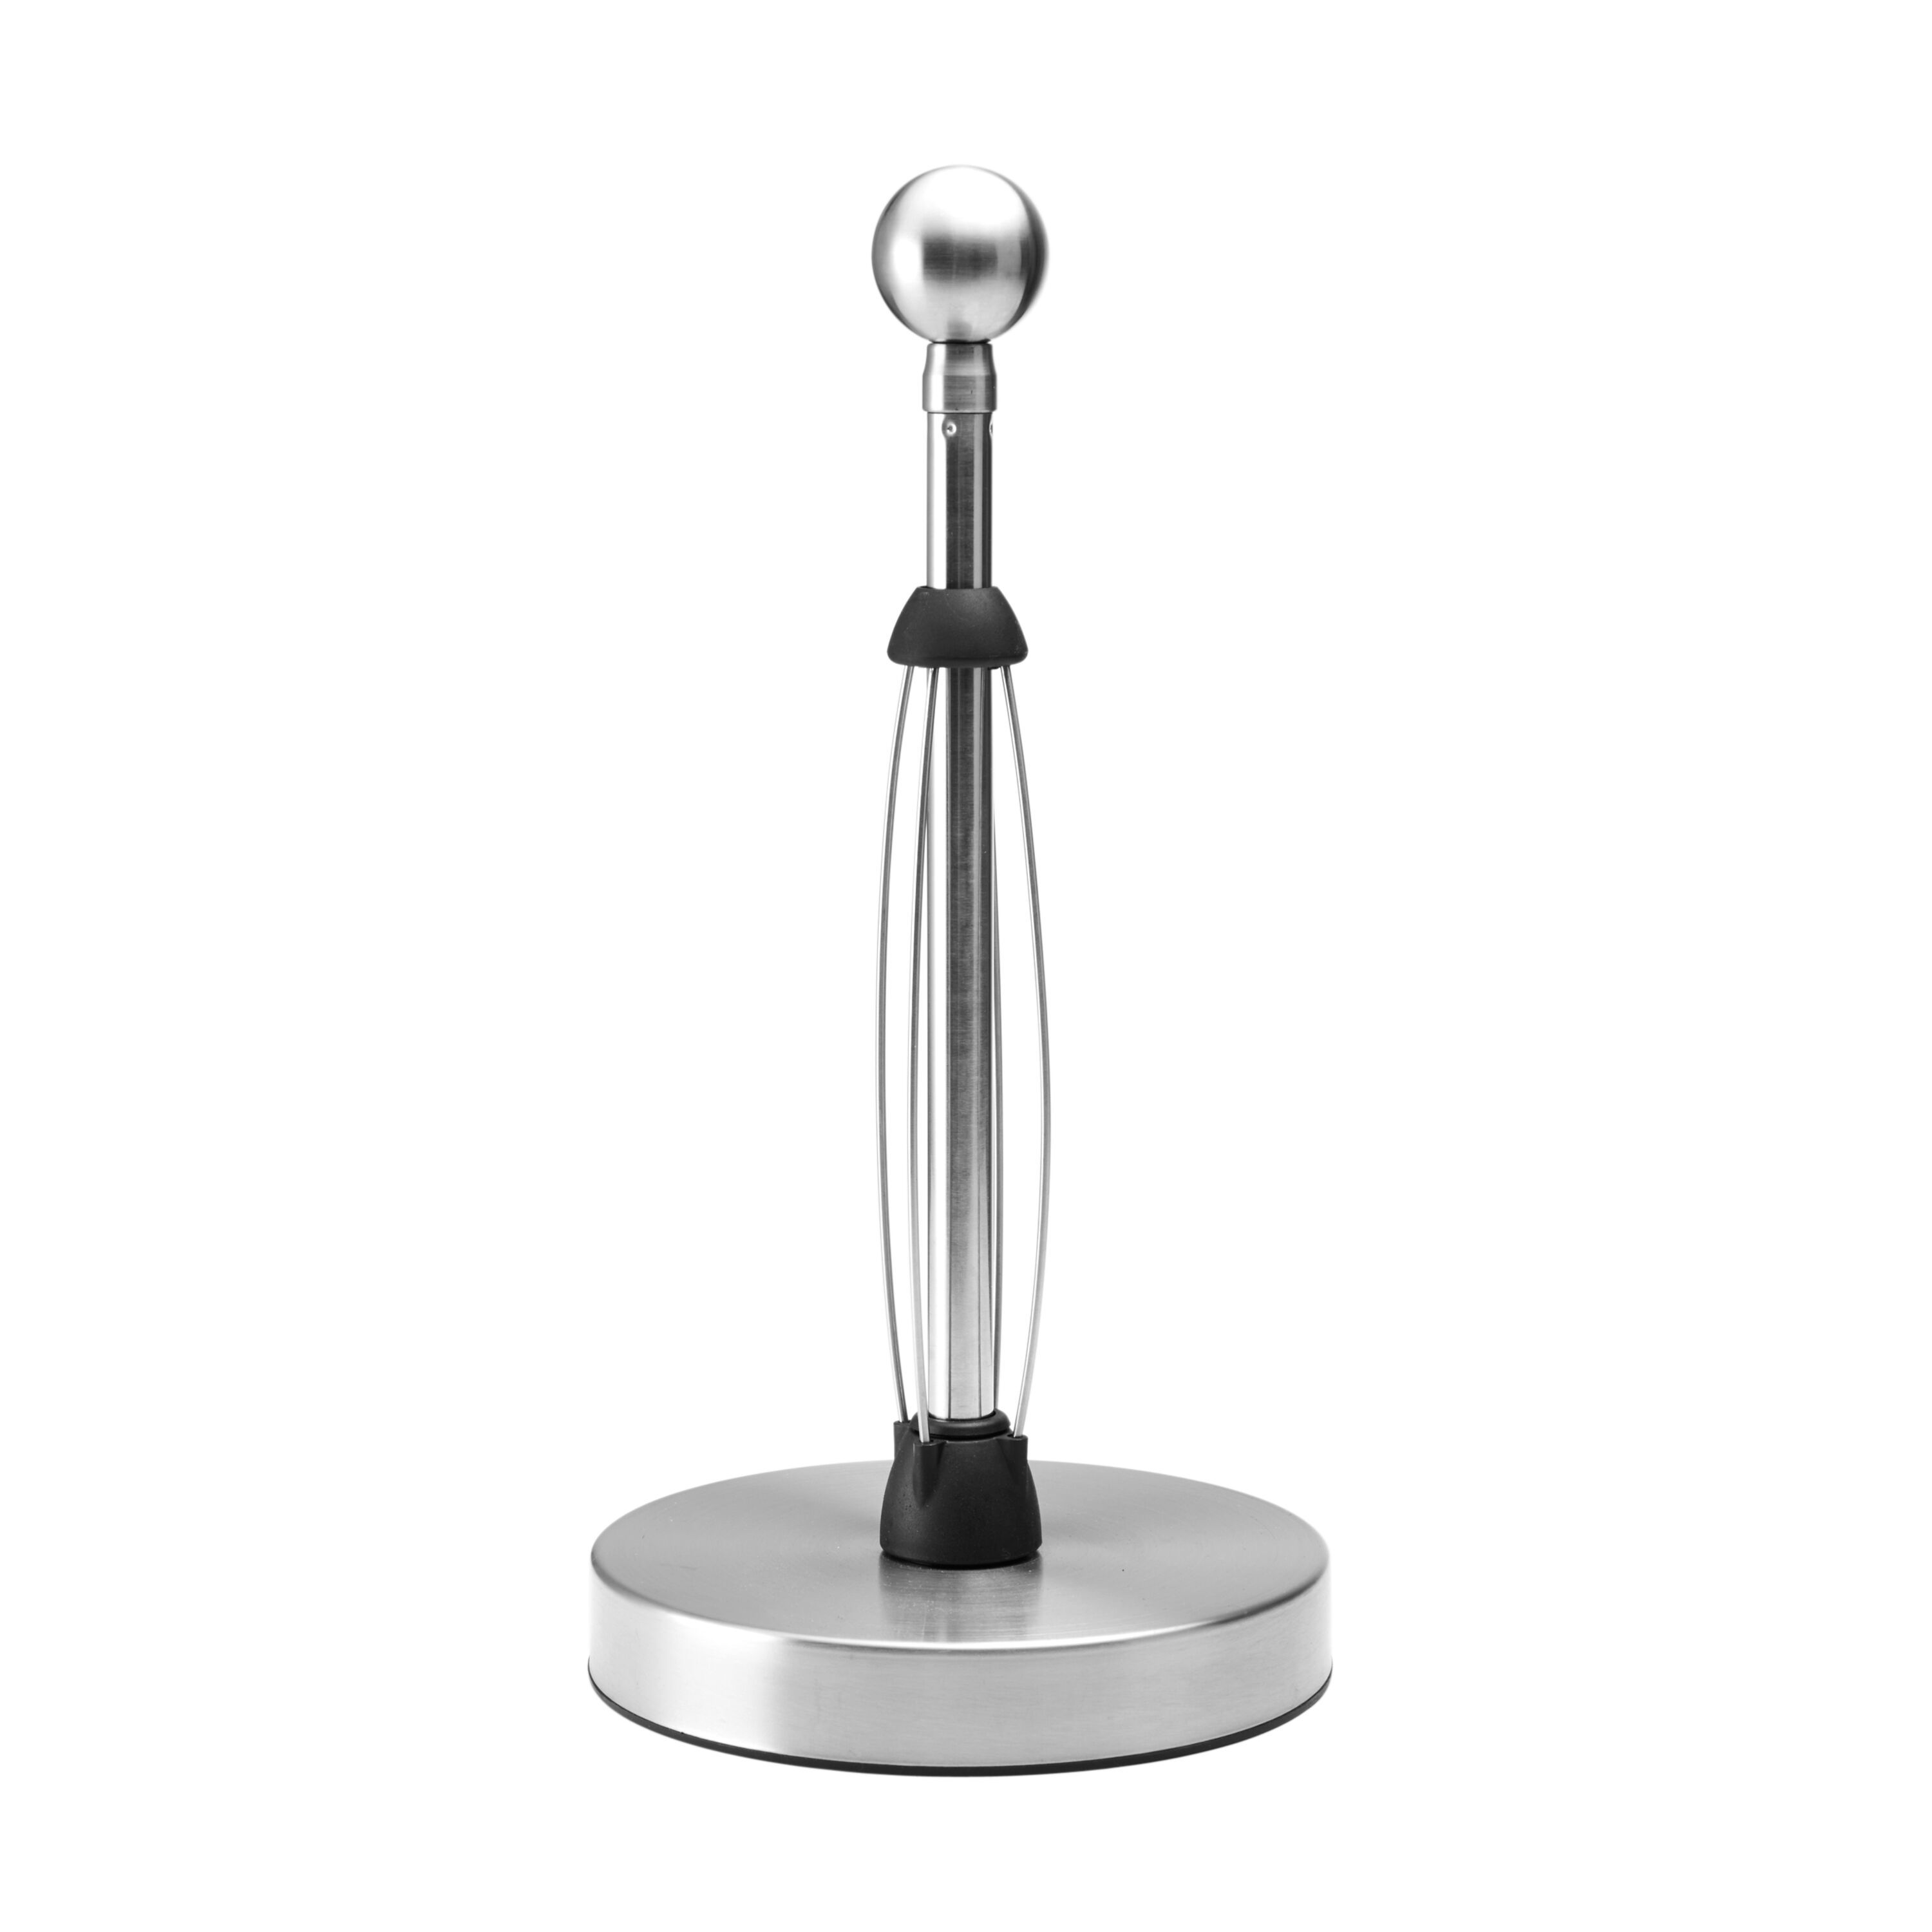 Kamenstein Ball Finial Perfect Tear Paper Towel Holder - image 1 of 7